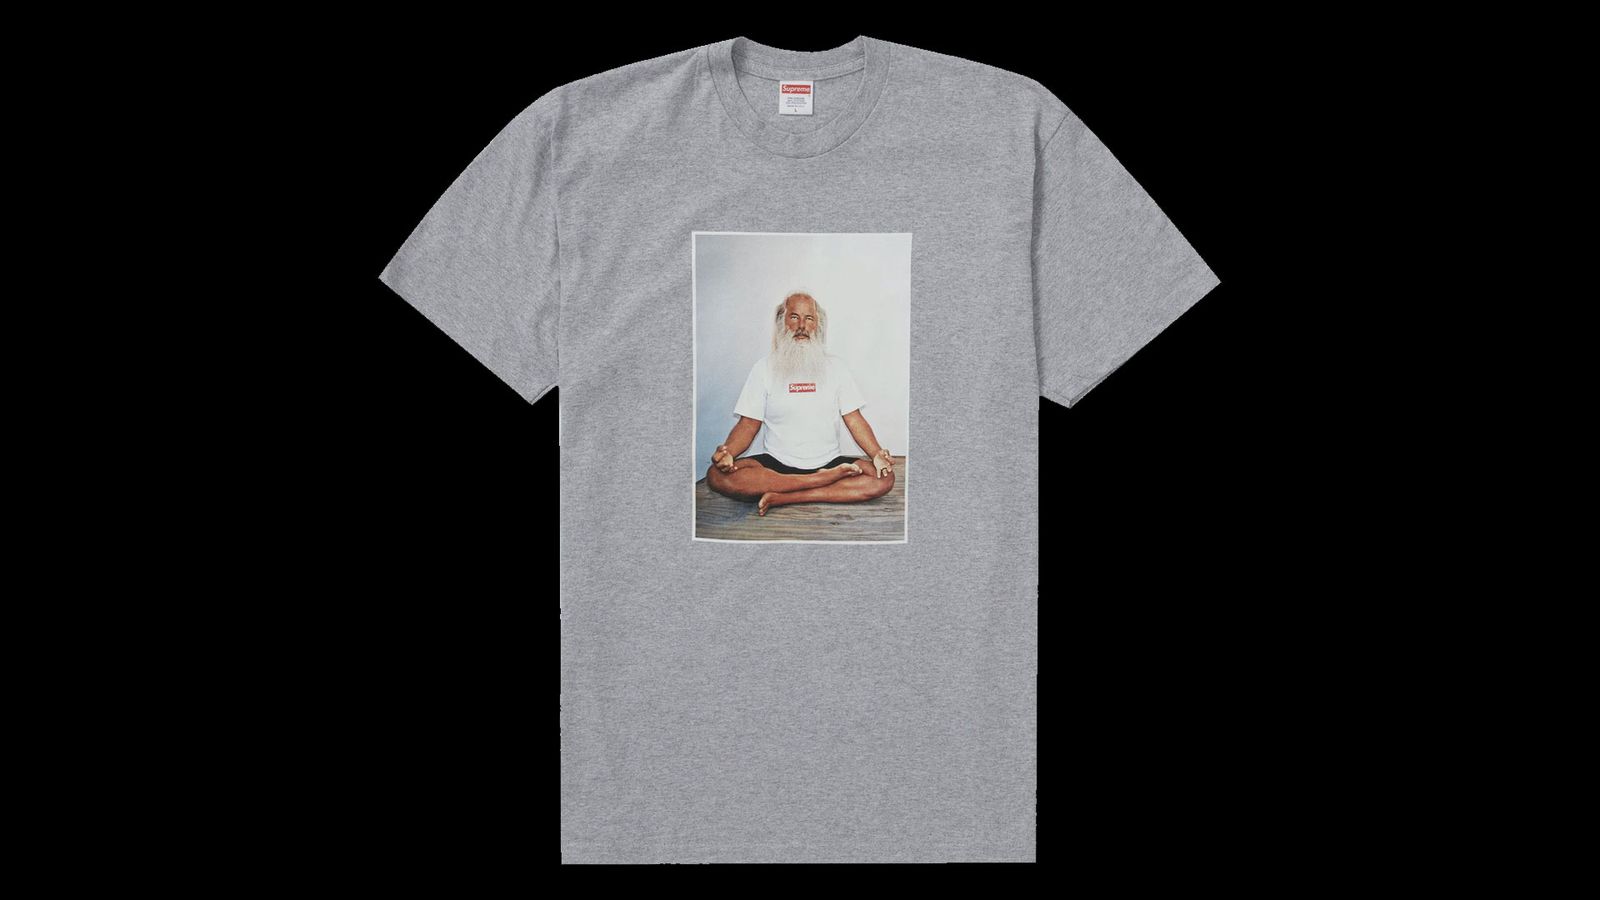 Supreme Rick Rubin Tee product image of a grey t-shirt with Rick Rubin cross-legged in the centre.